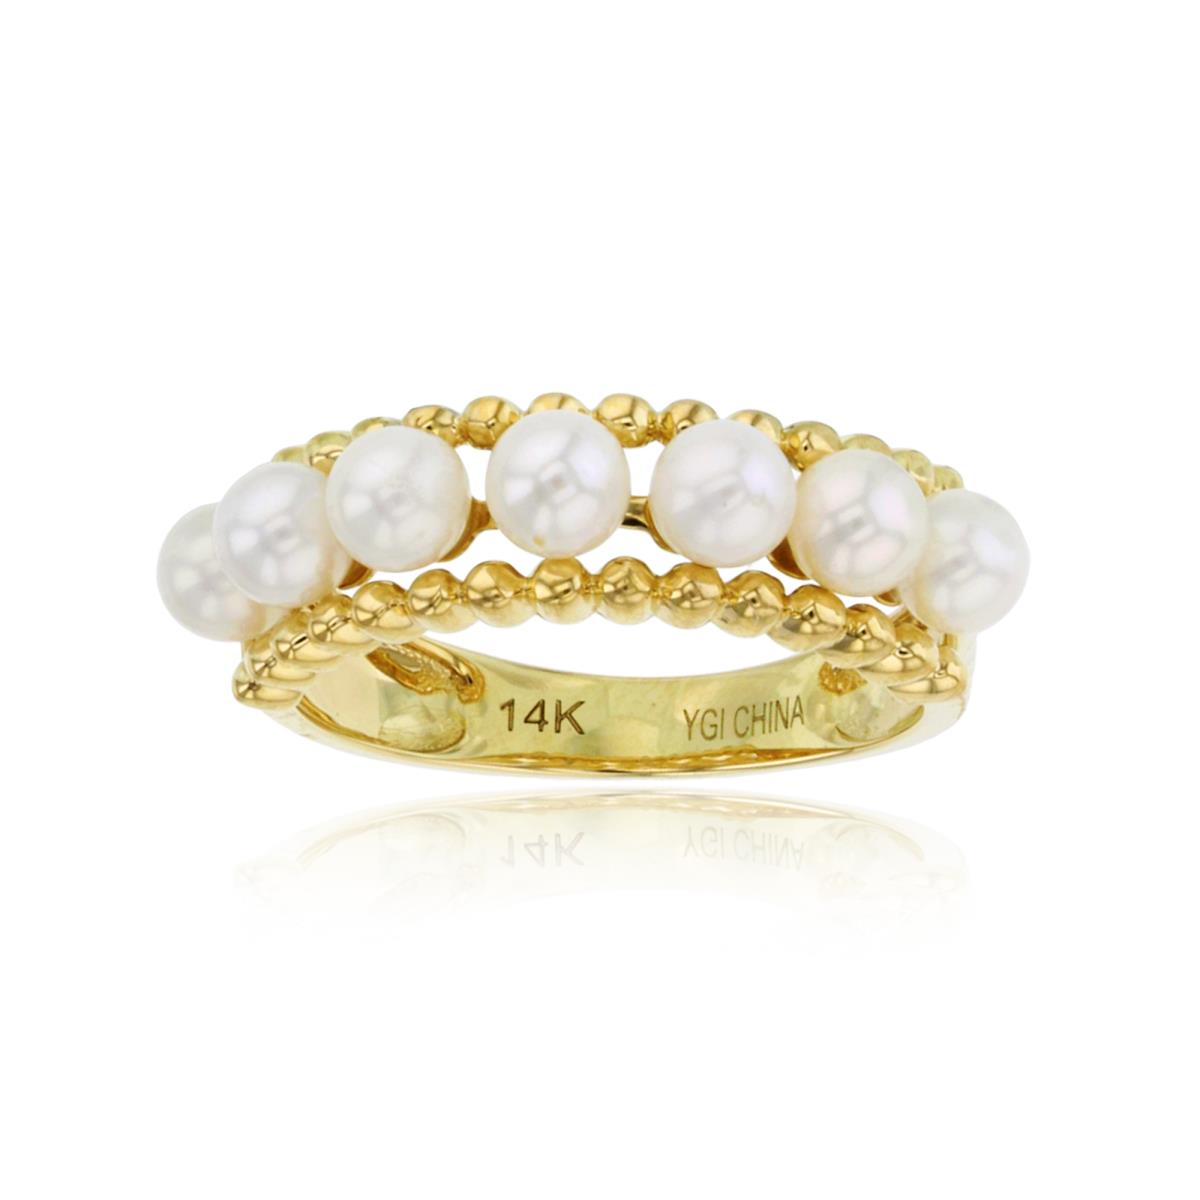 14K Yellow Gold 4mm Rnd White Pearls Beaded Band 